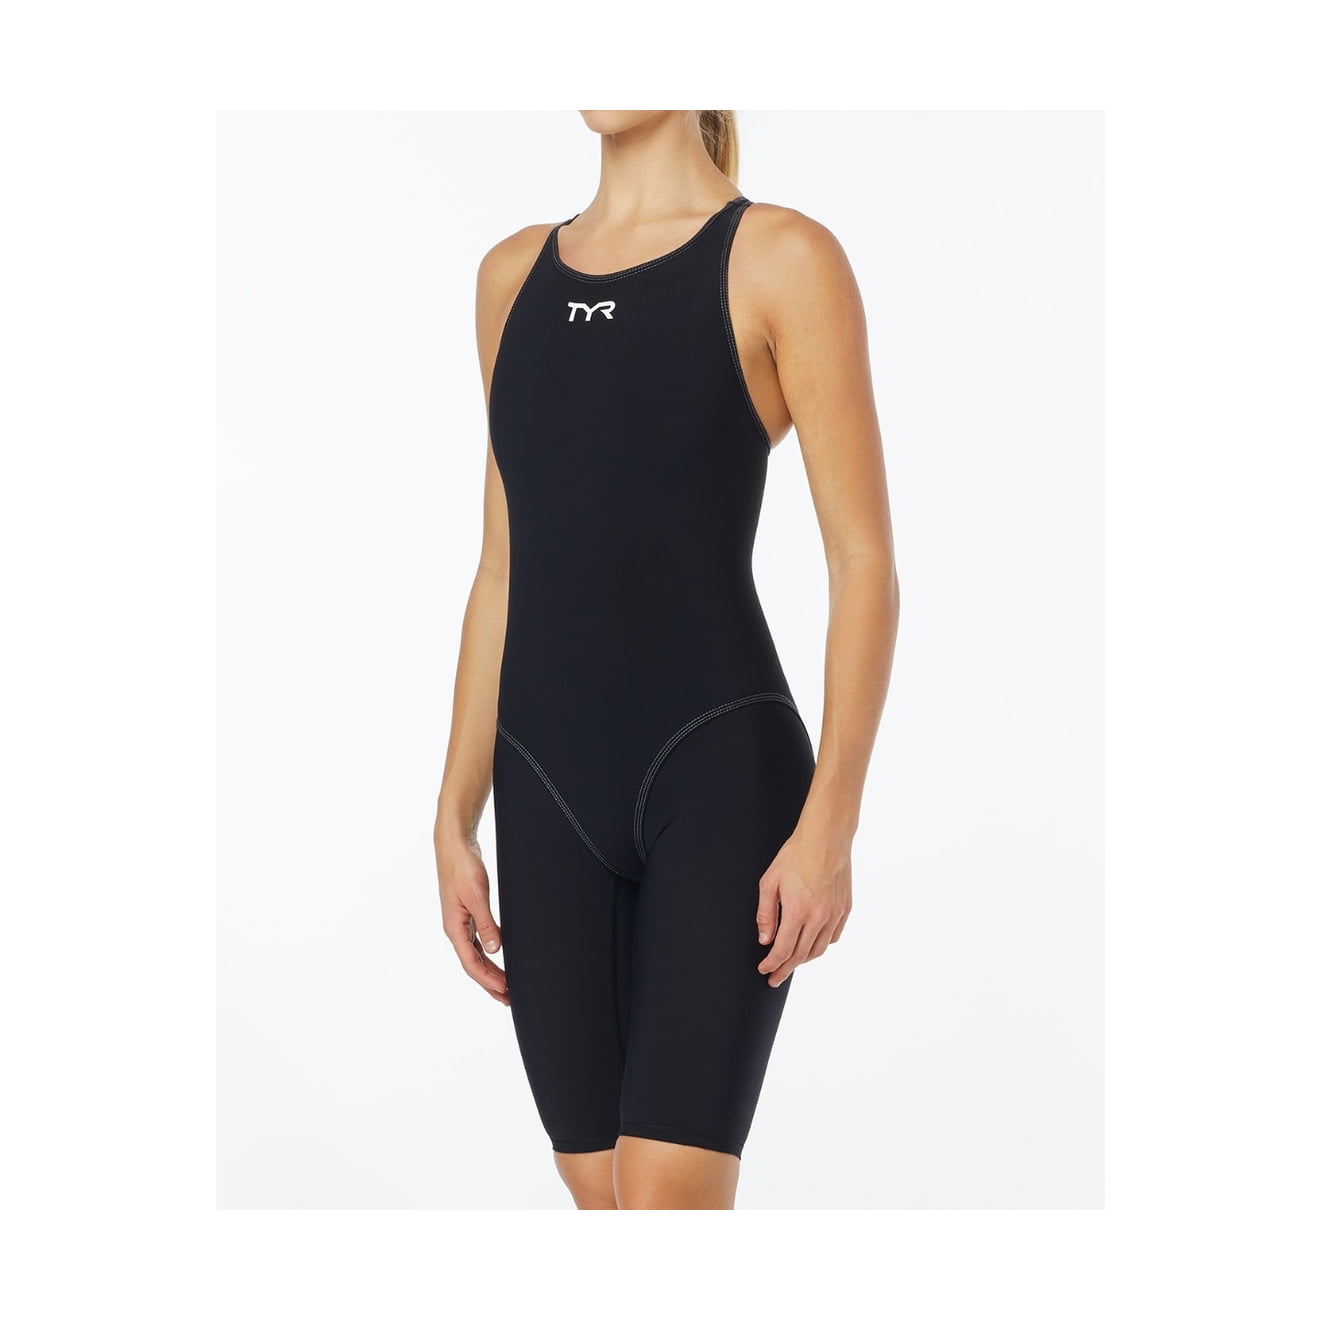 TYR Women's Grab Bag Fitness Suits *NEW* Ships Free*  $24.99 